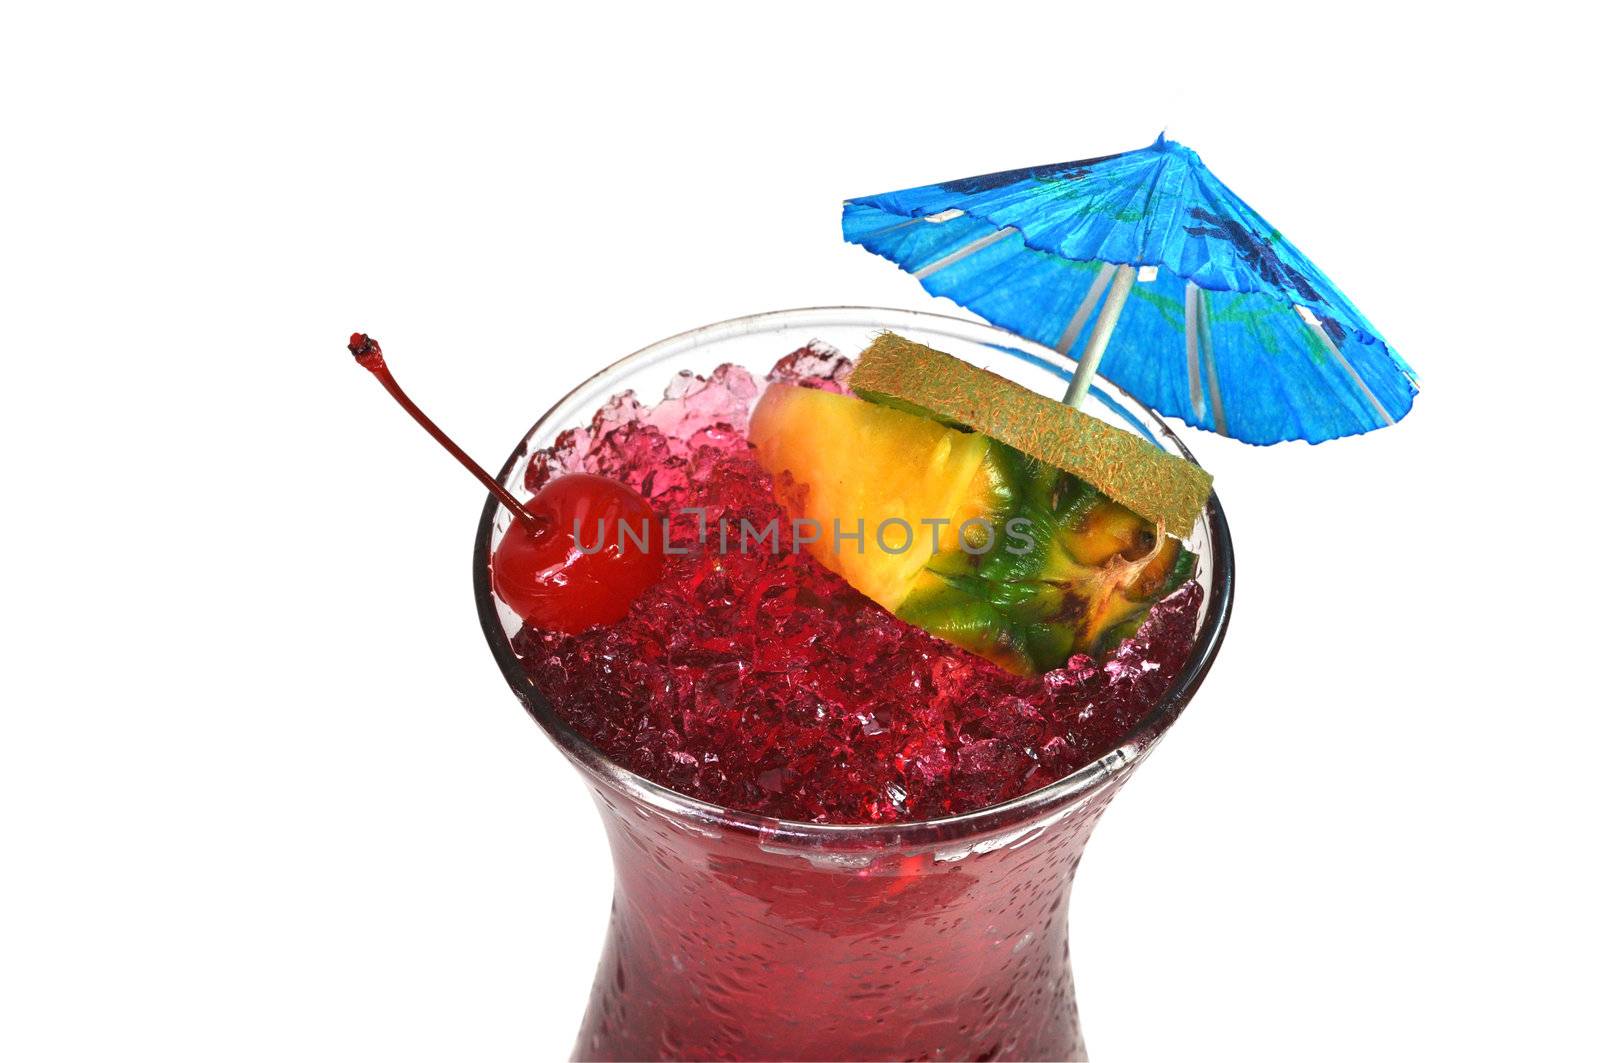 Hurricane tropical drink with pineapple, kiwi, cherry, and umbrella.  Isolated on white background with clipping path.